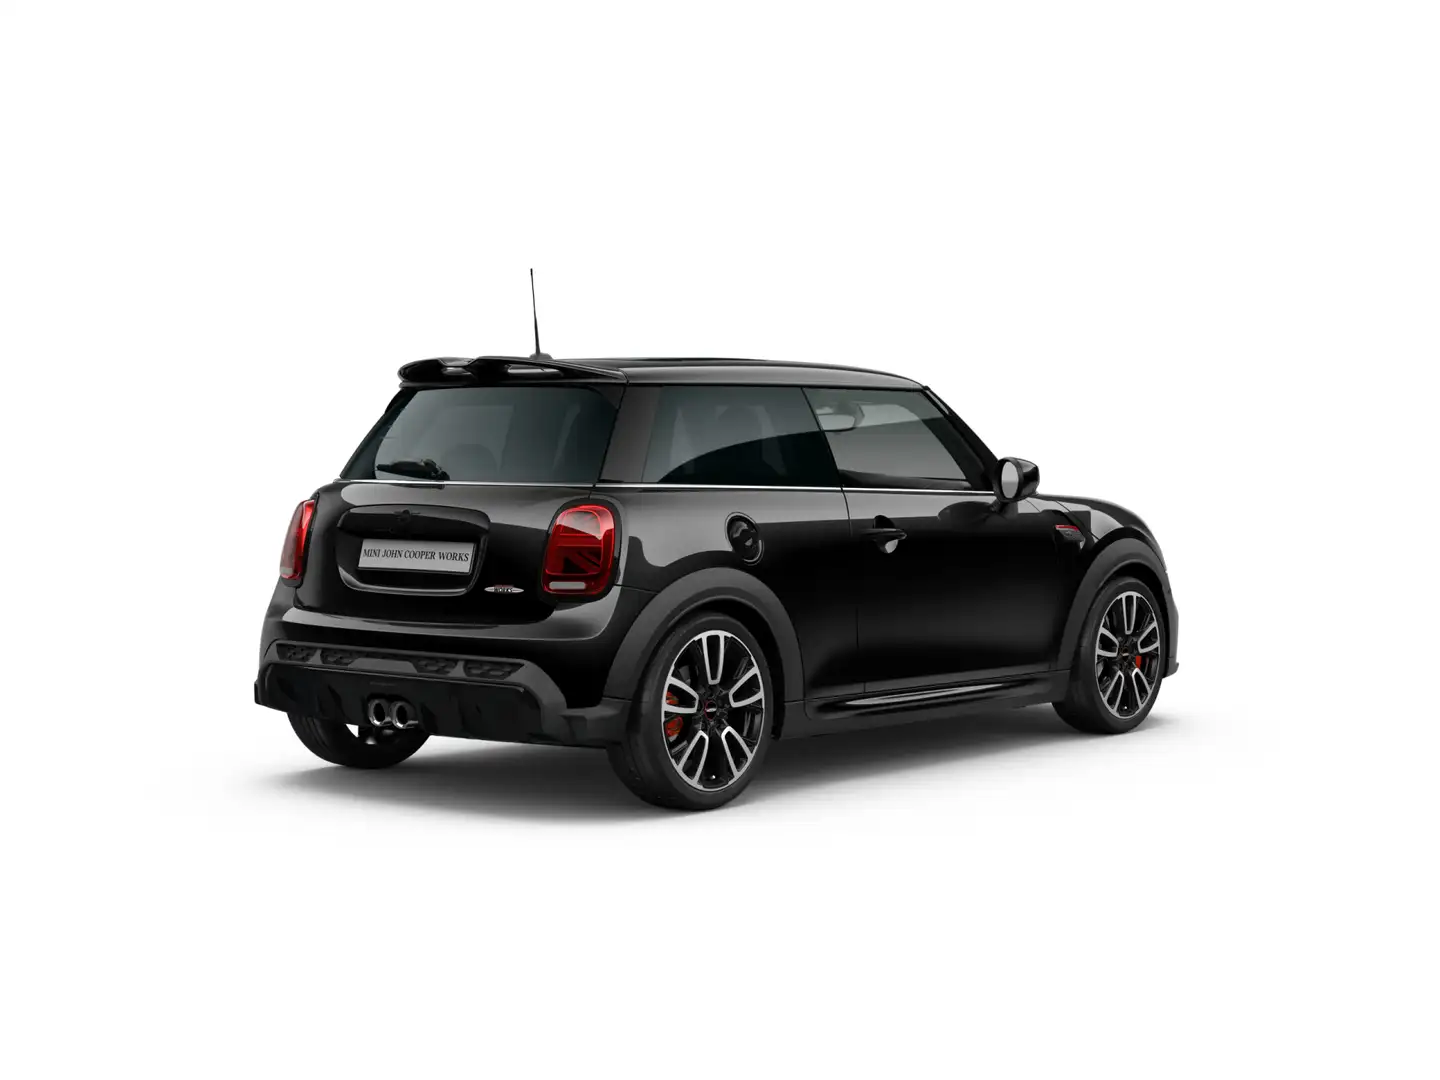 MINI John Cooper Works 1 TO 6 LIMITED EDITION 1 OF 999 Nero - 2